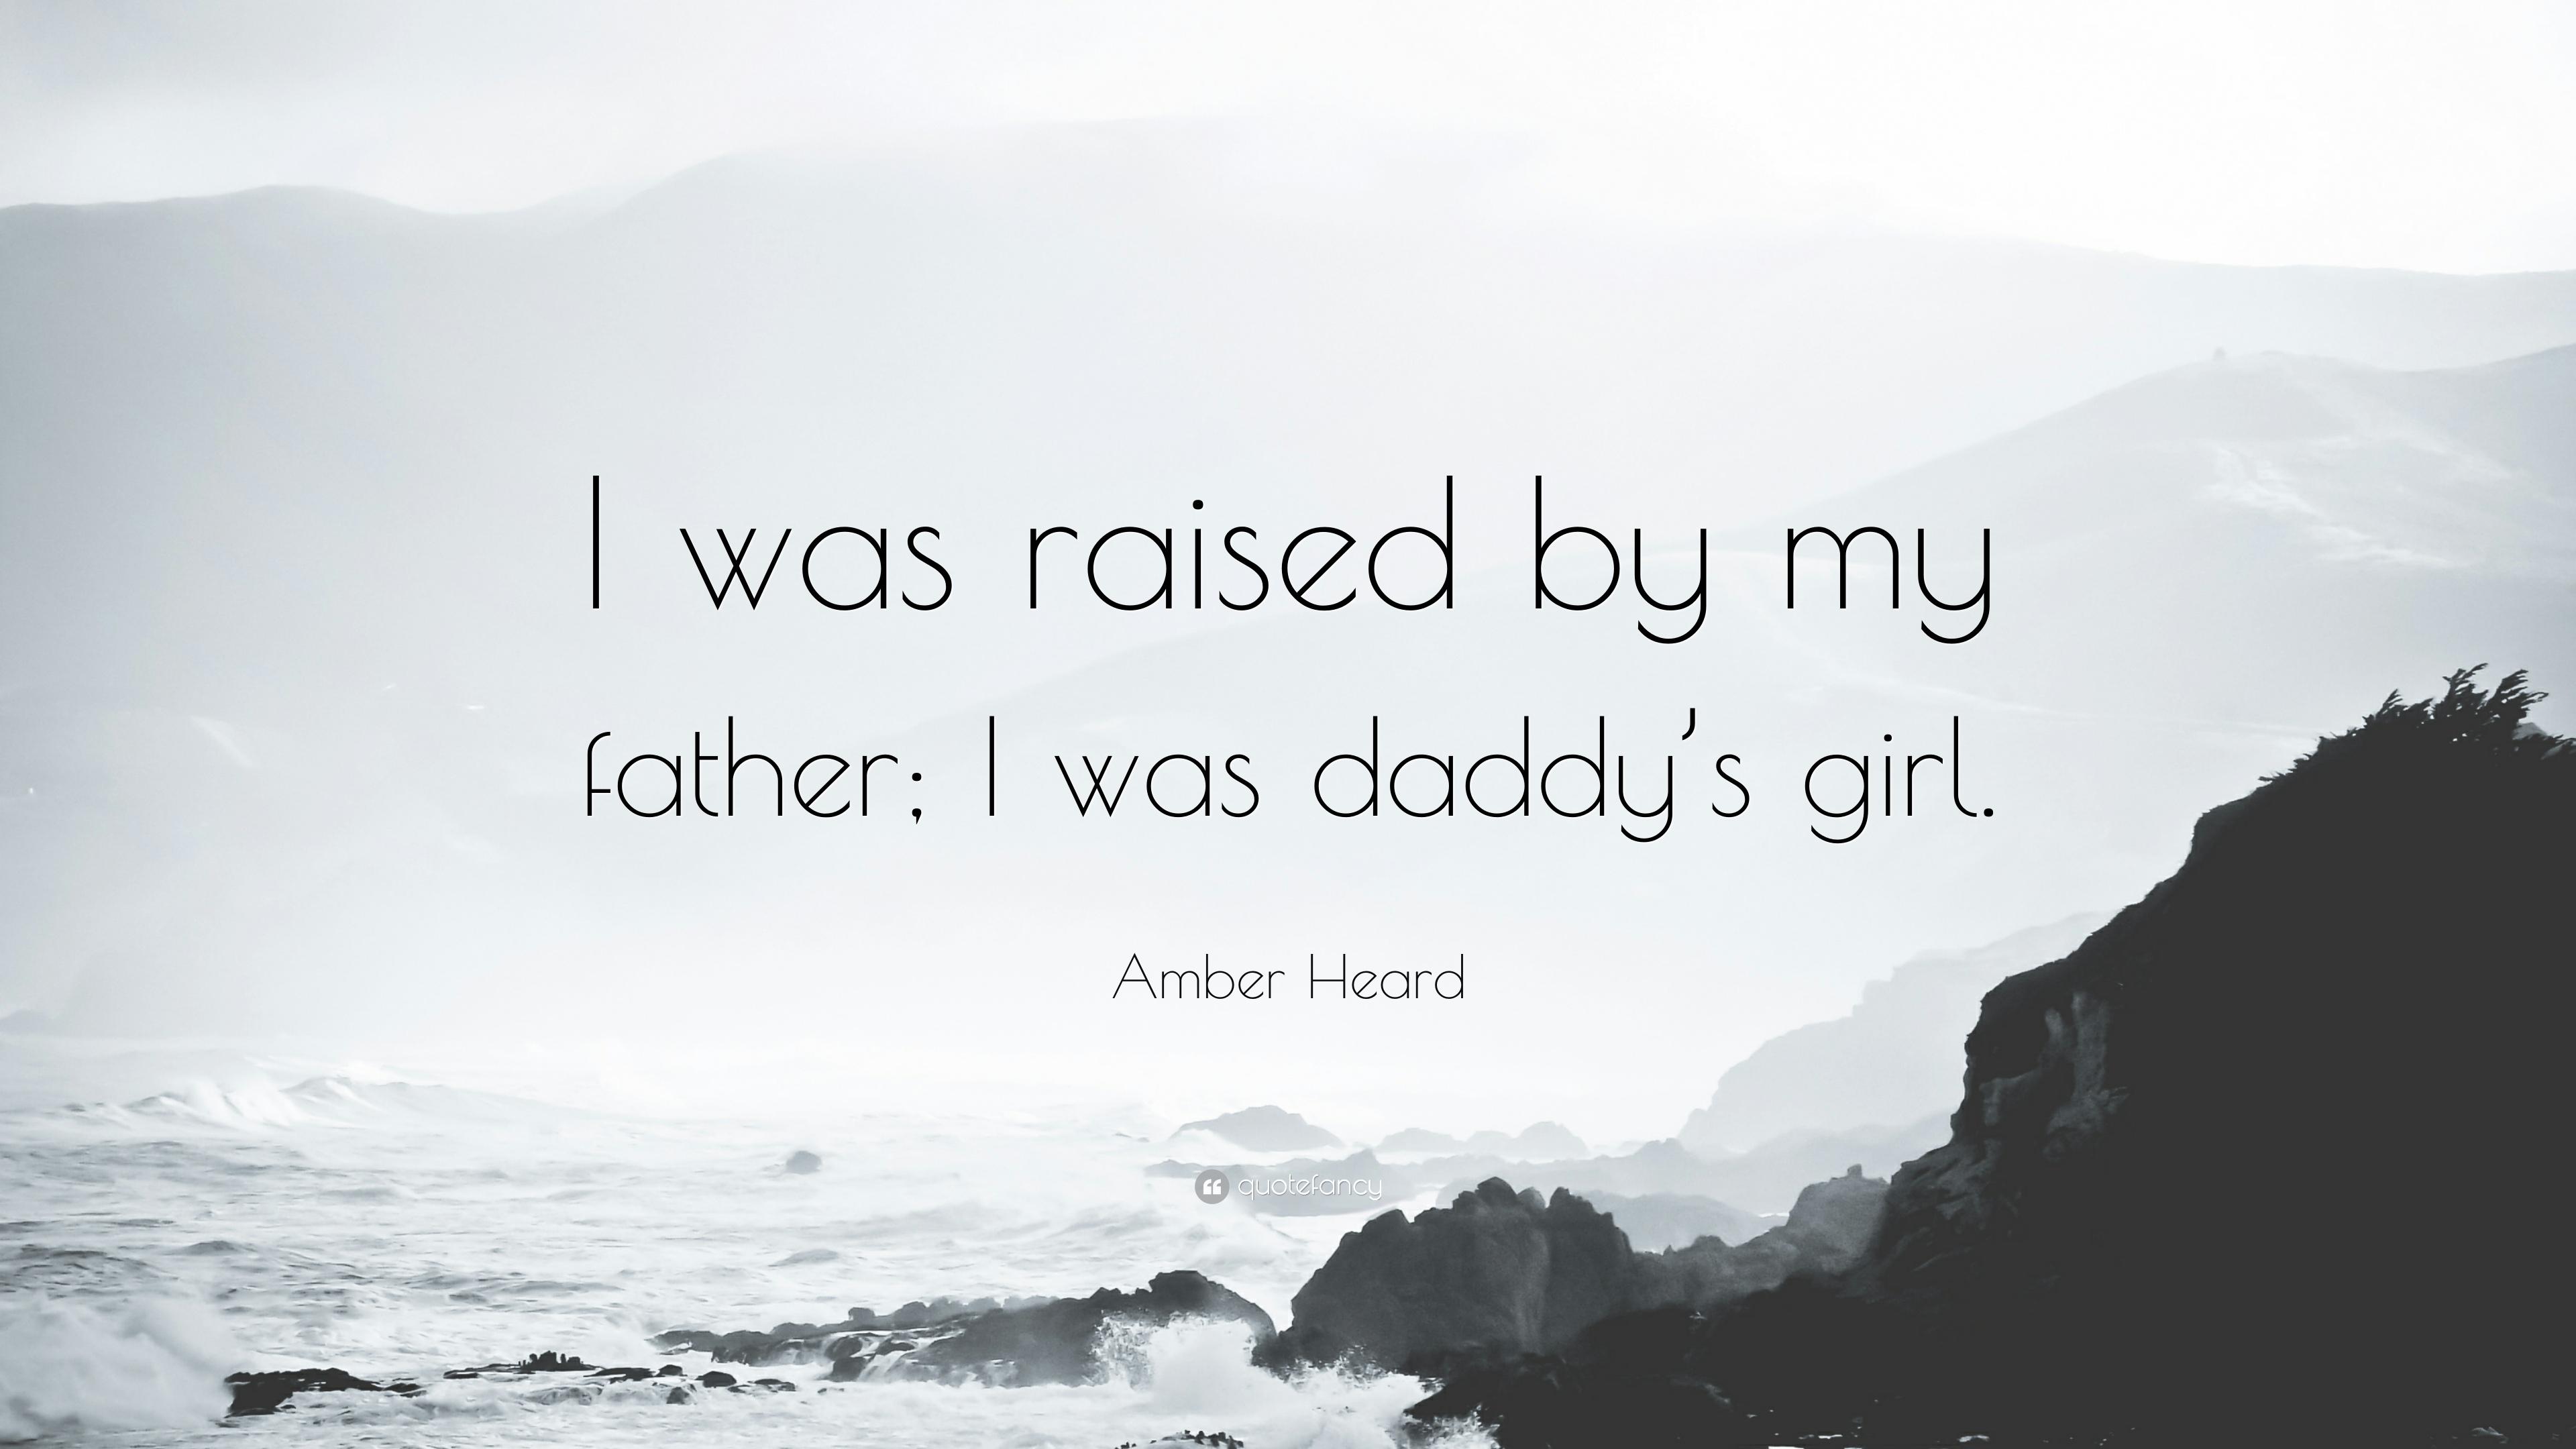 Amber Heard Quote: “I was raised by my father; I was daddy's girl